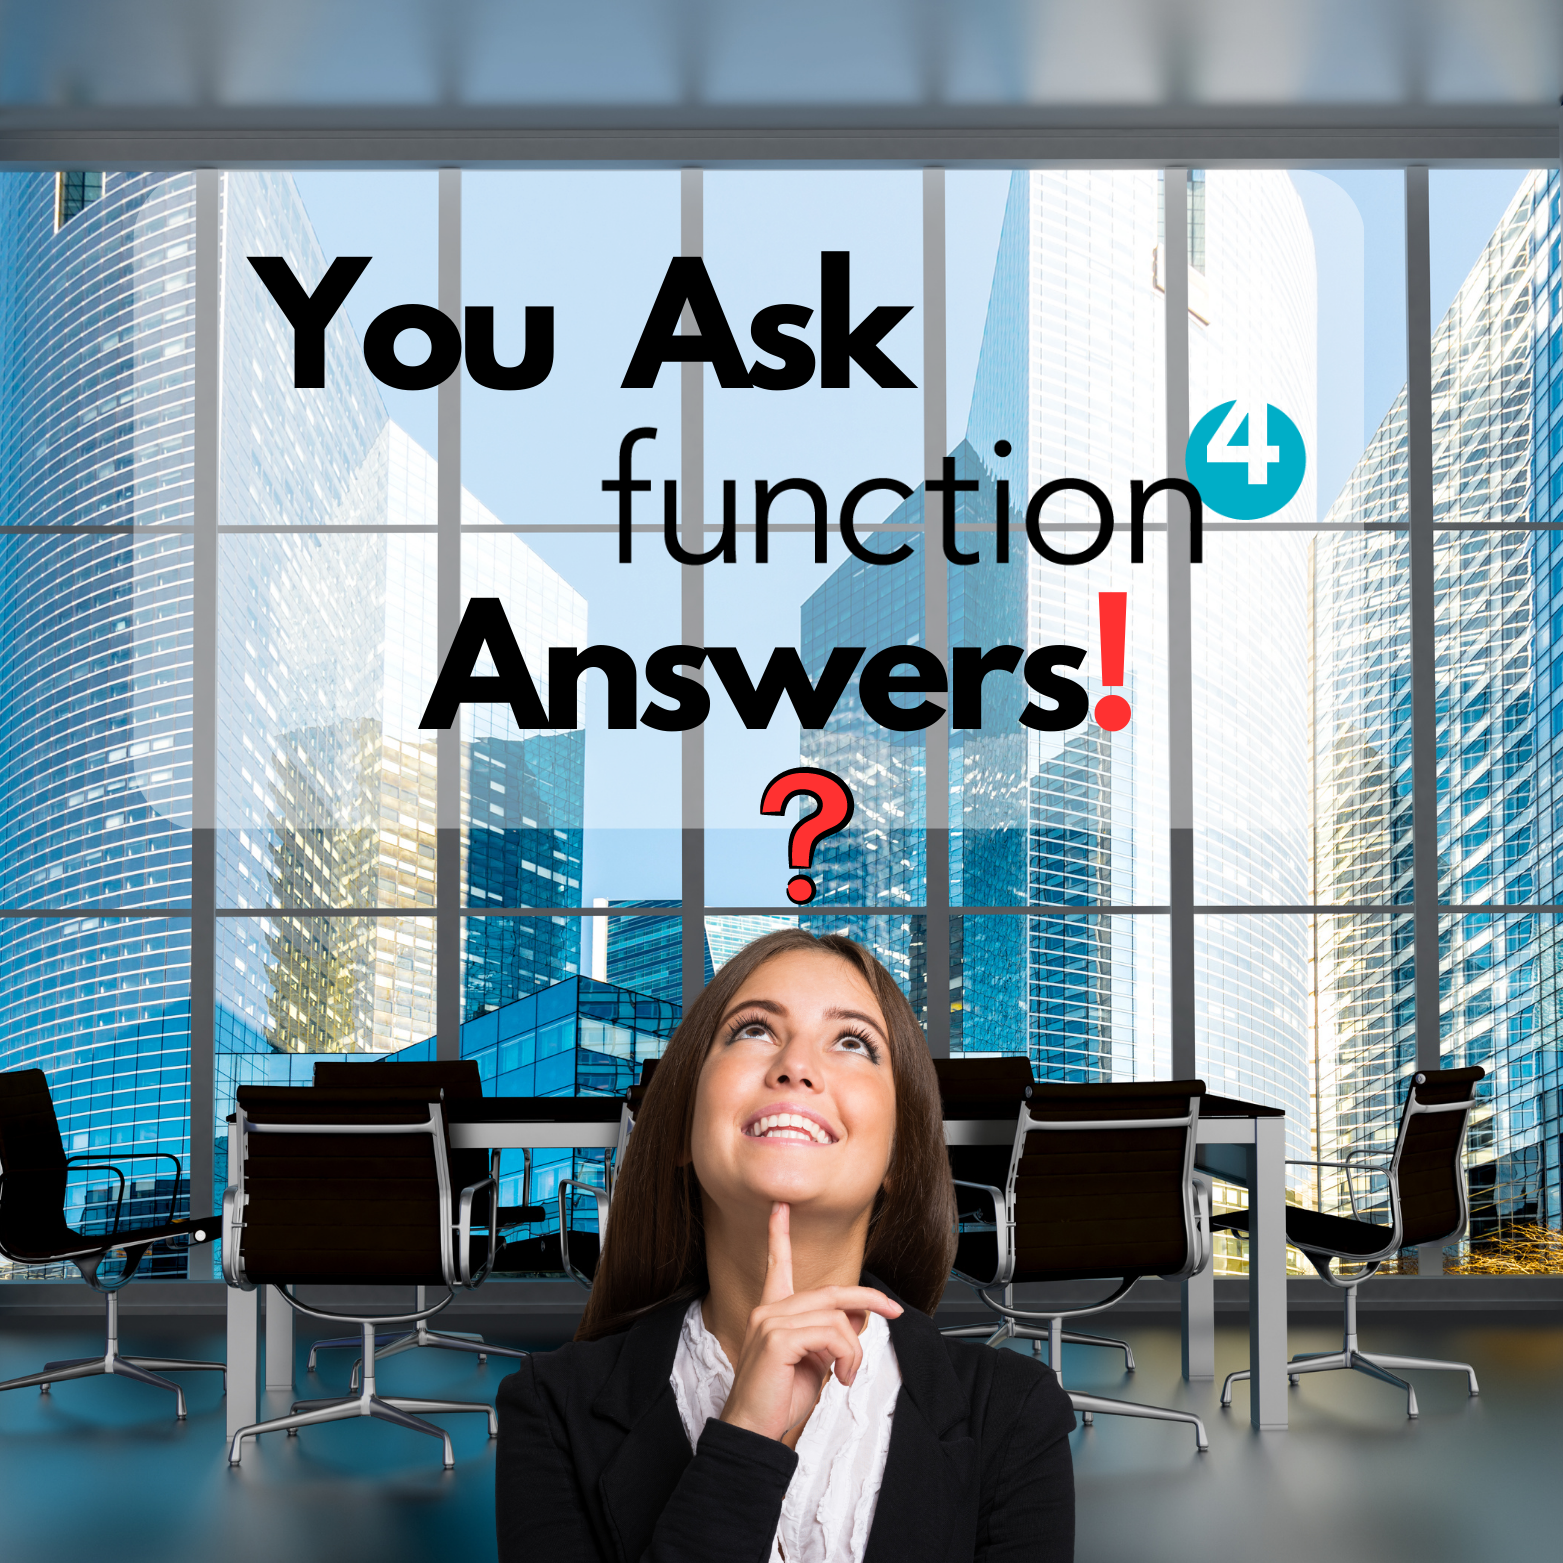 You ask Function 4 answers